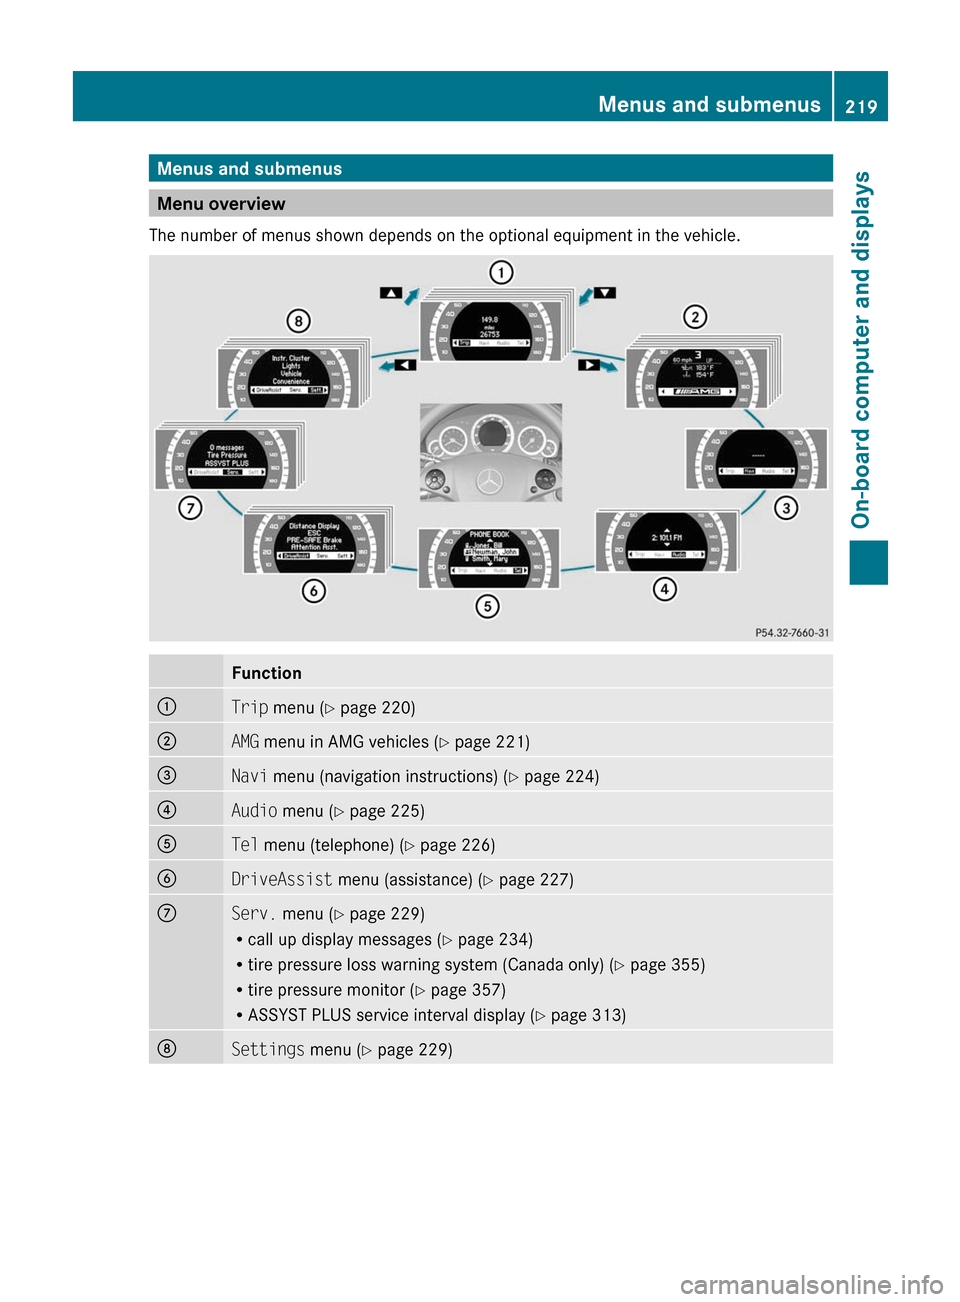 MERCEDES-BENZ E550 4MATIC 2011 W212 User Guide Menus and submenus
Menu overview
The number of menus shown depends on the optional equipment in the vehicle. 
Function:Trip  menu ( Y page 220);AMG  menu in AMG vehicles ( Y page 221)=Navi  menu (navi